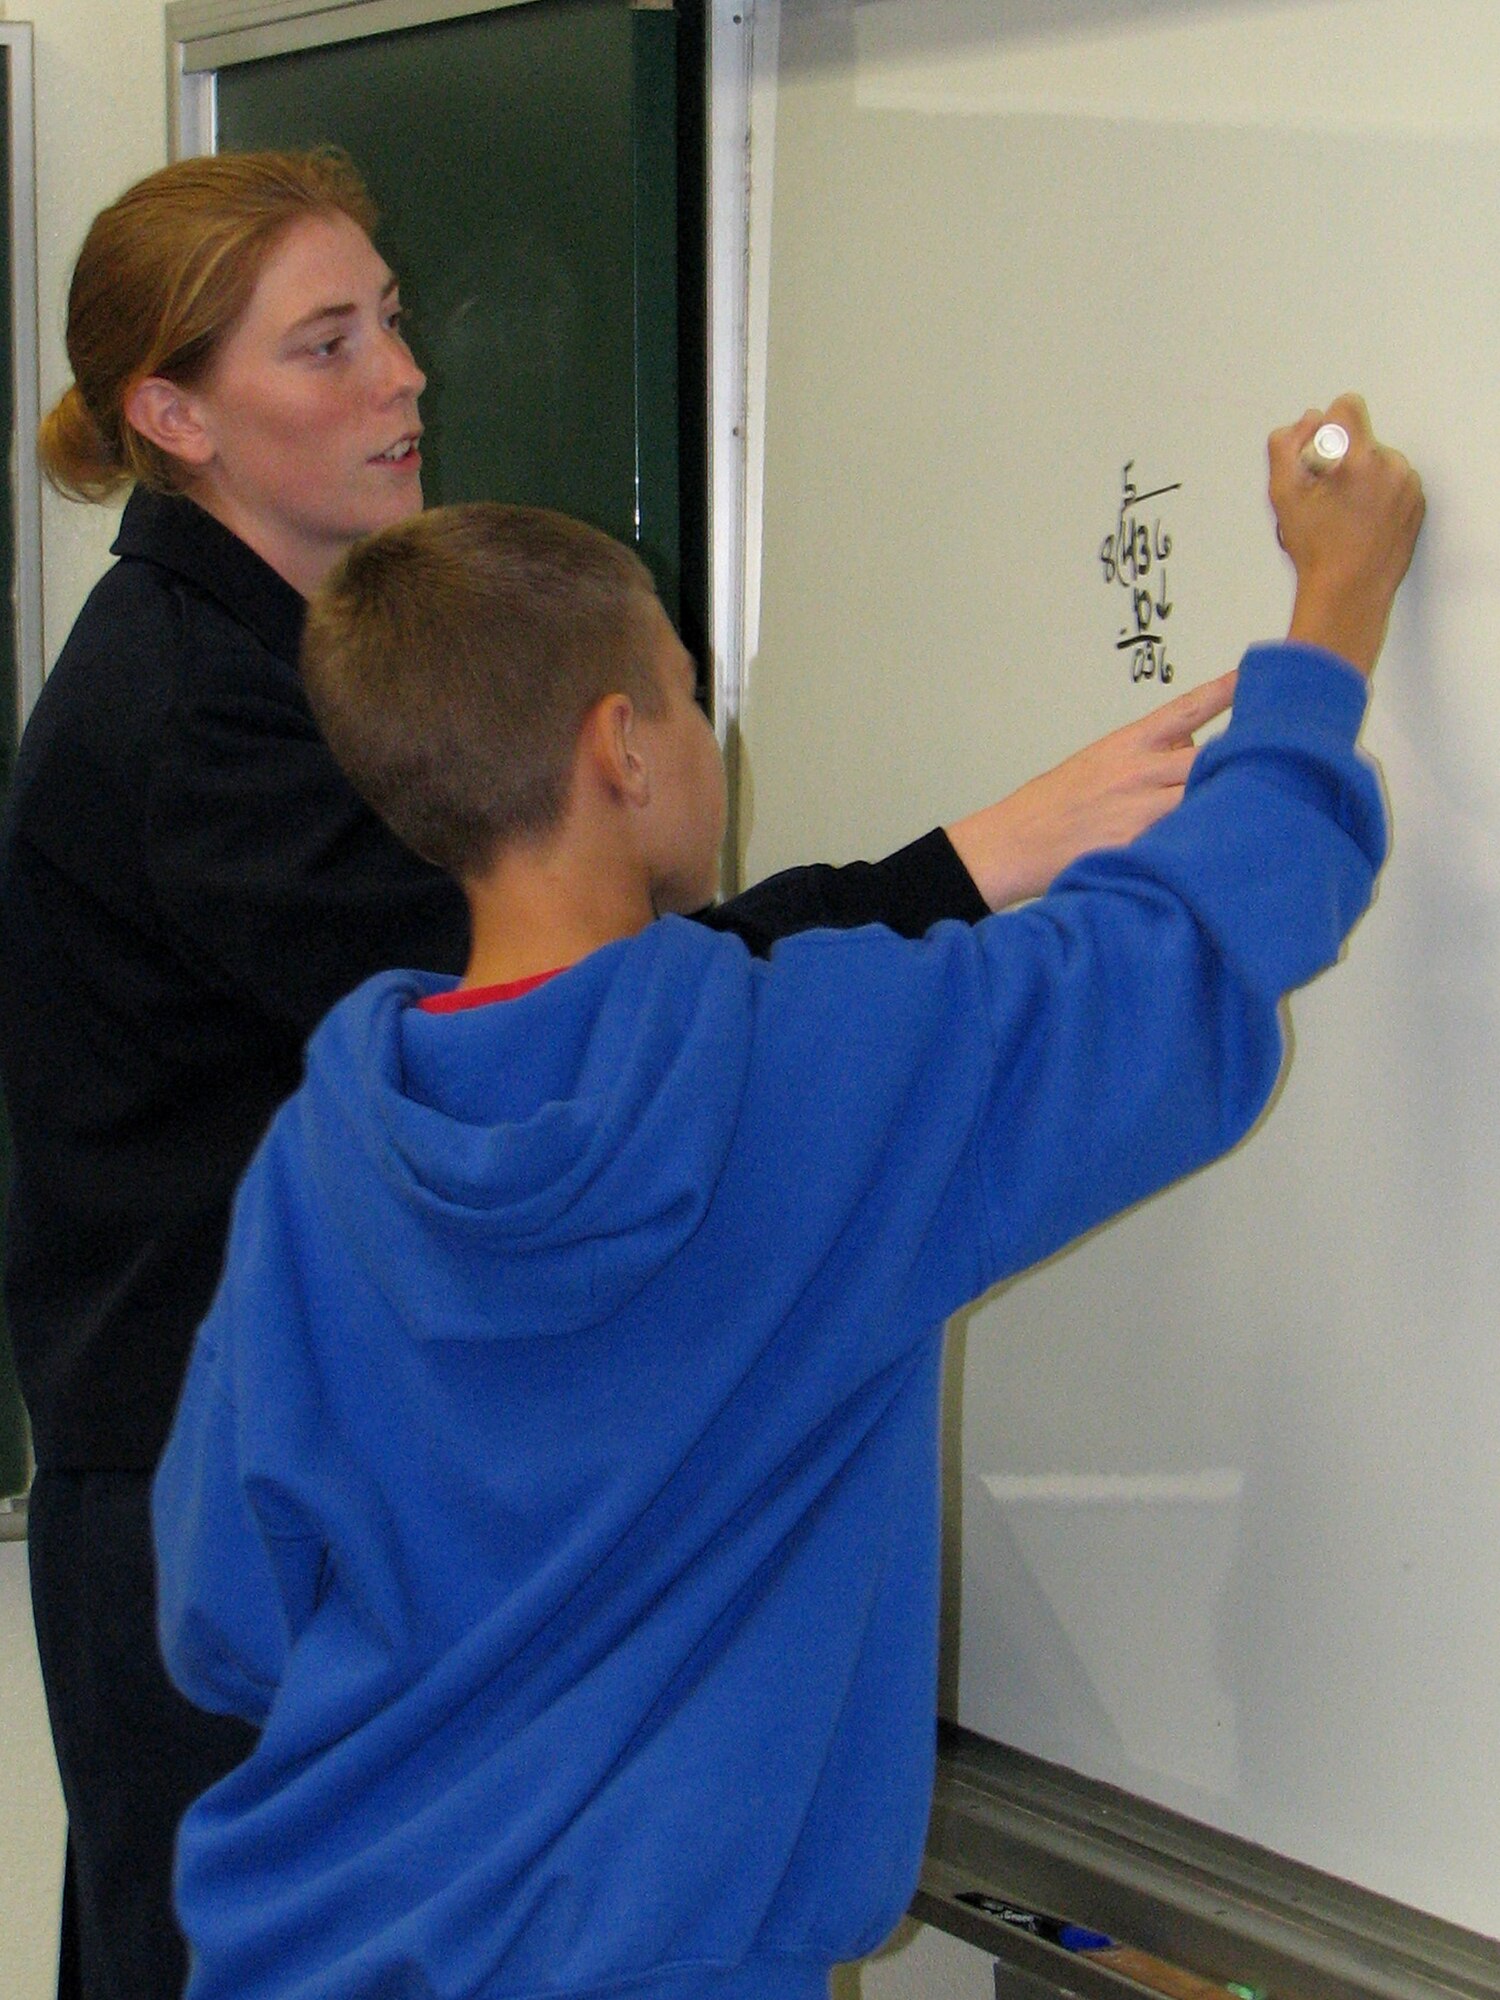 Staff Sgt. Rose Witmer, a 390th Intelligence Squadron cryptologic operator, helps Brendan McCafferty understand mathematics.  Team Kadena members mentor students to help them succeed academically. (Courtesy photo)